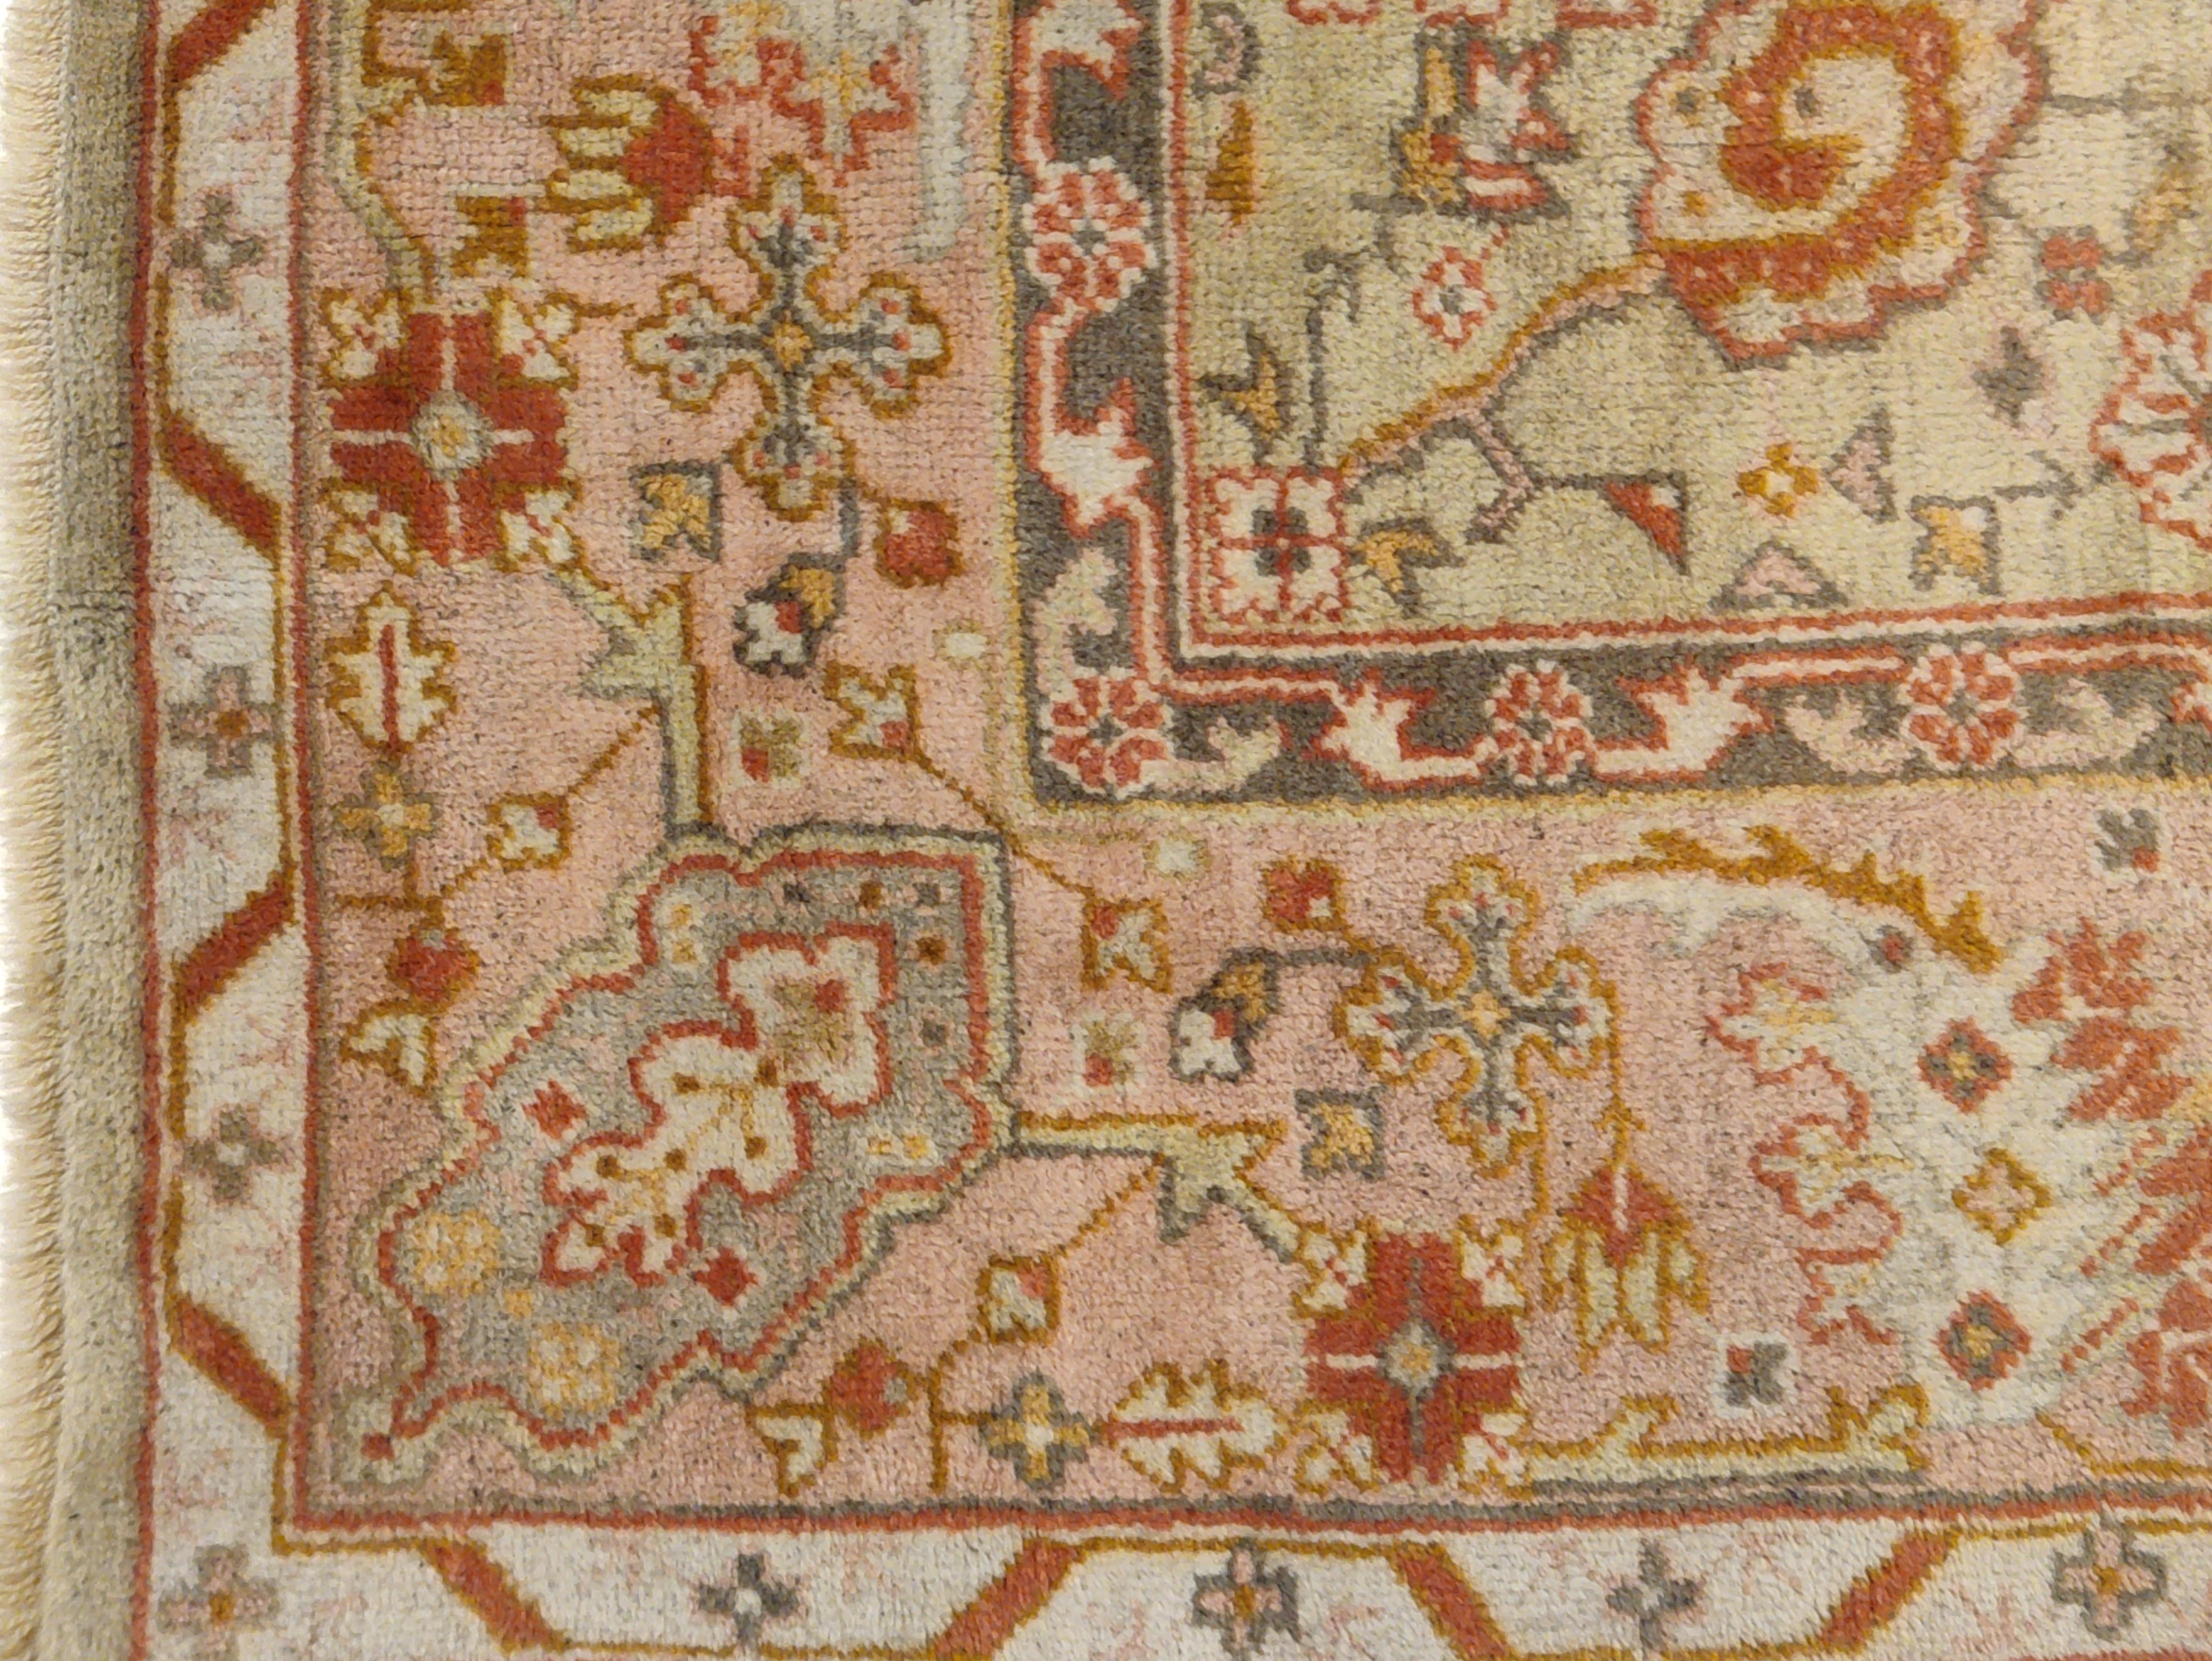 Fine Antique Allover Design Celadon Green Oushak Rug with Blush Pink Border In Excellent Condition For Sale In Milan, IT